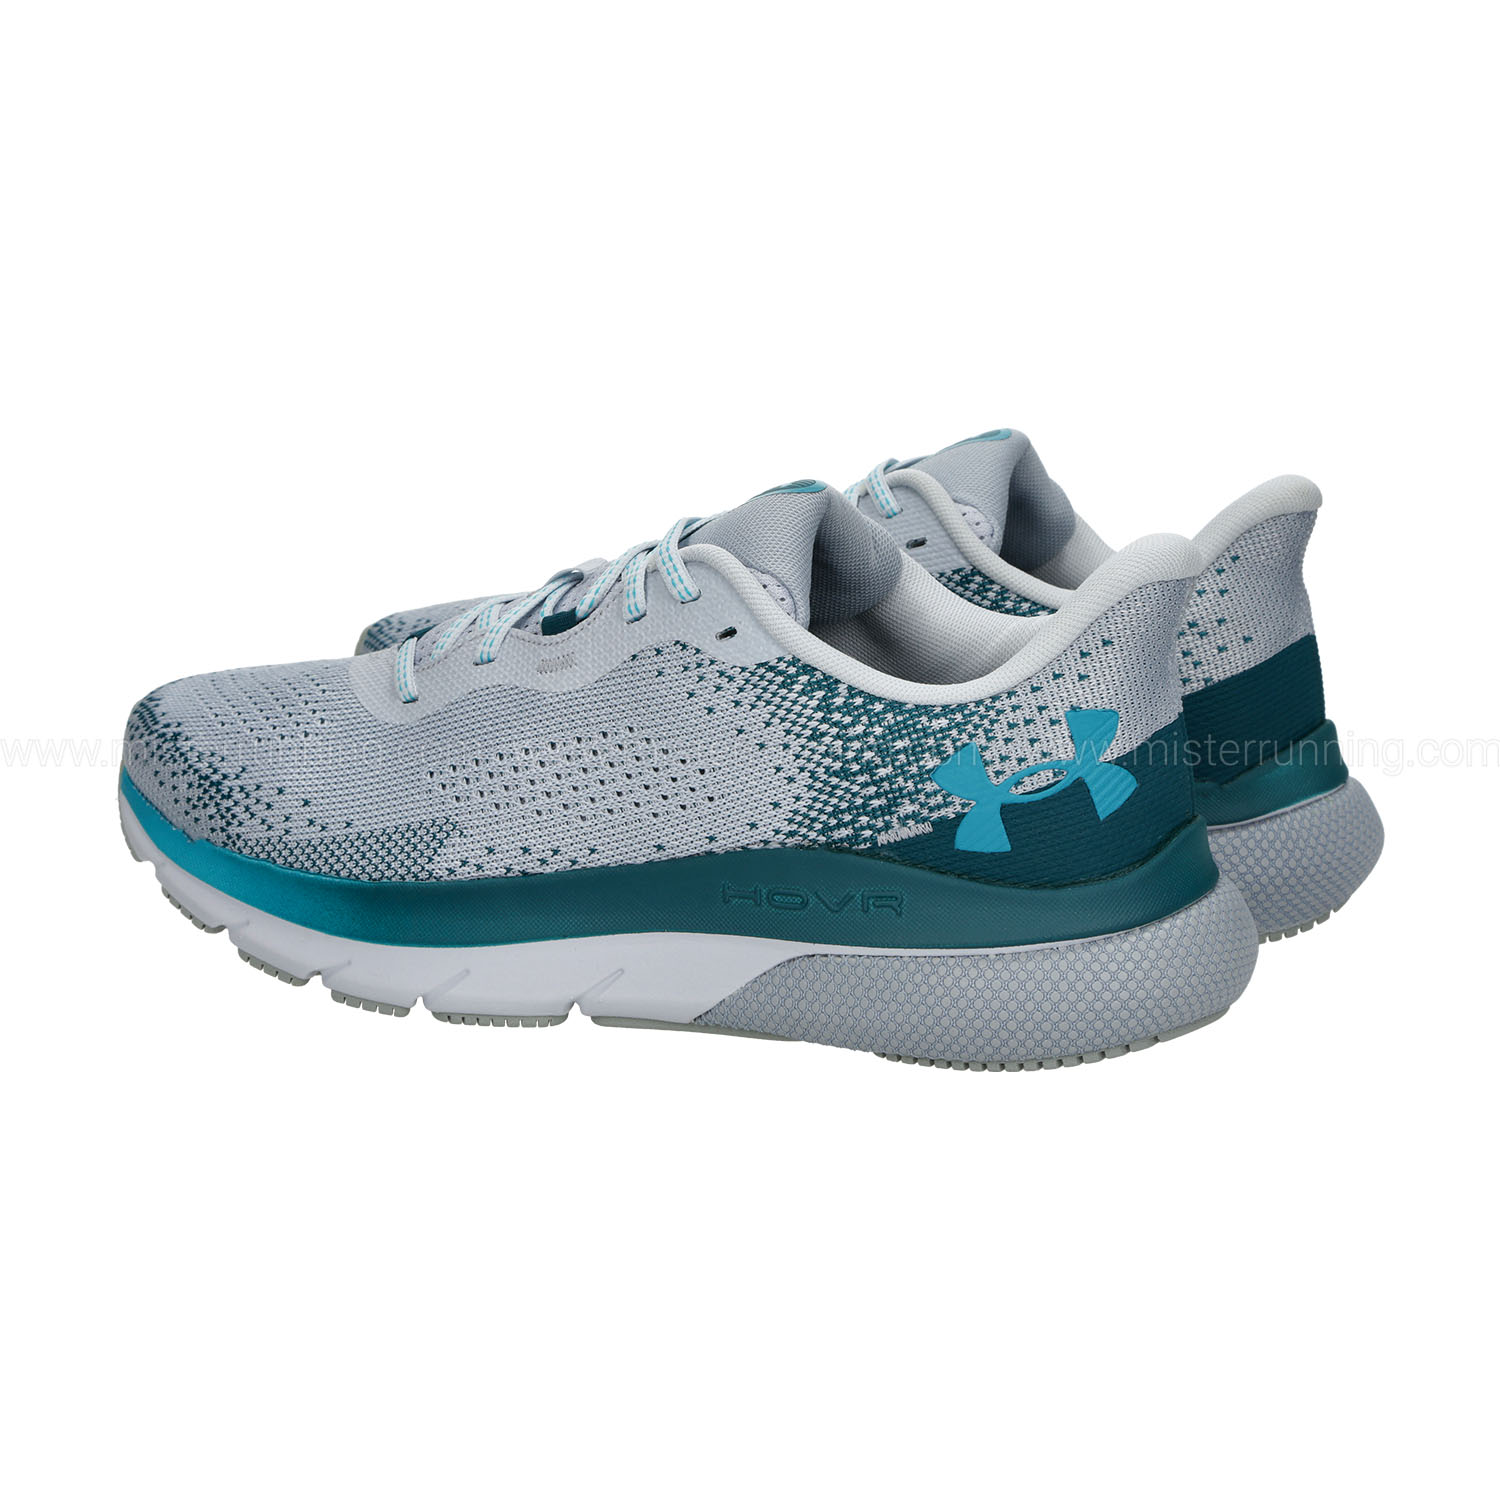 Under Armour HOVR Turbulence 2 - Halo Gray/Hydro Teal/Circuit Teal